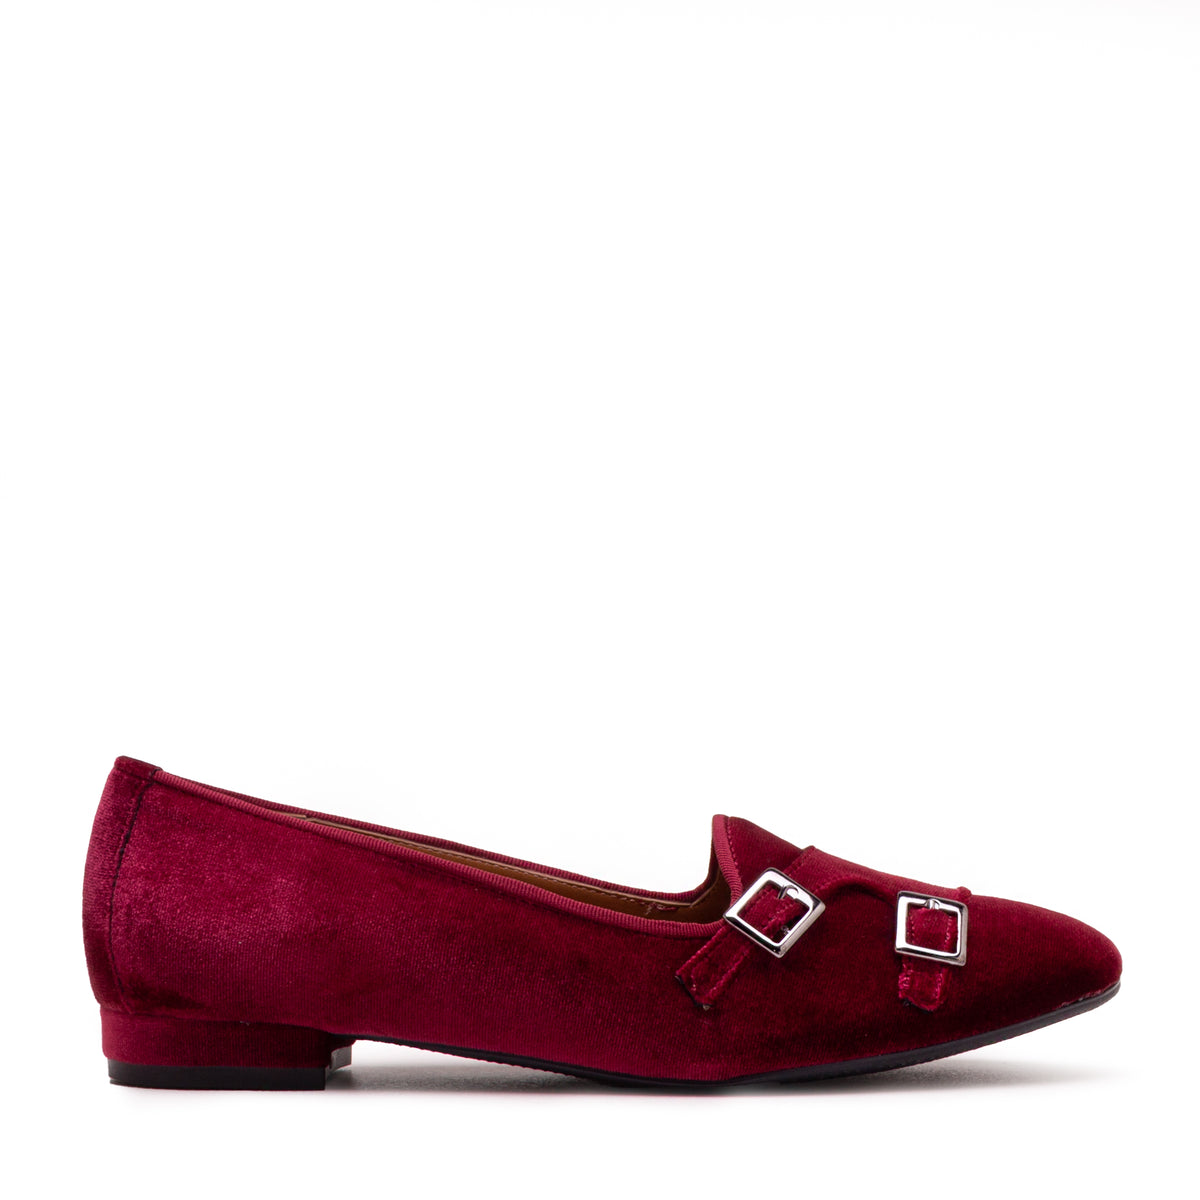 MARRAKECH LOAFERS